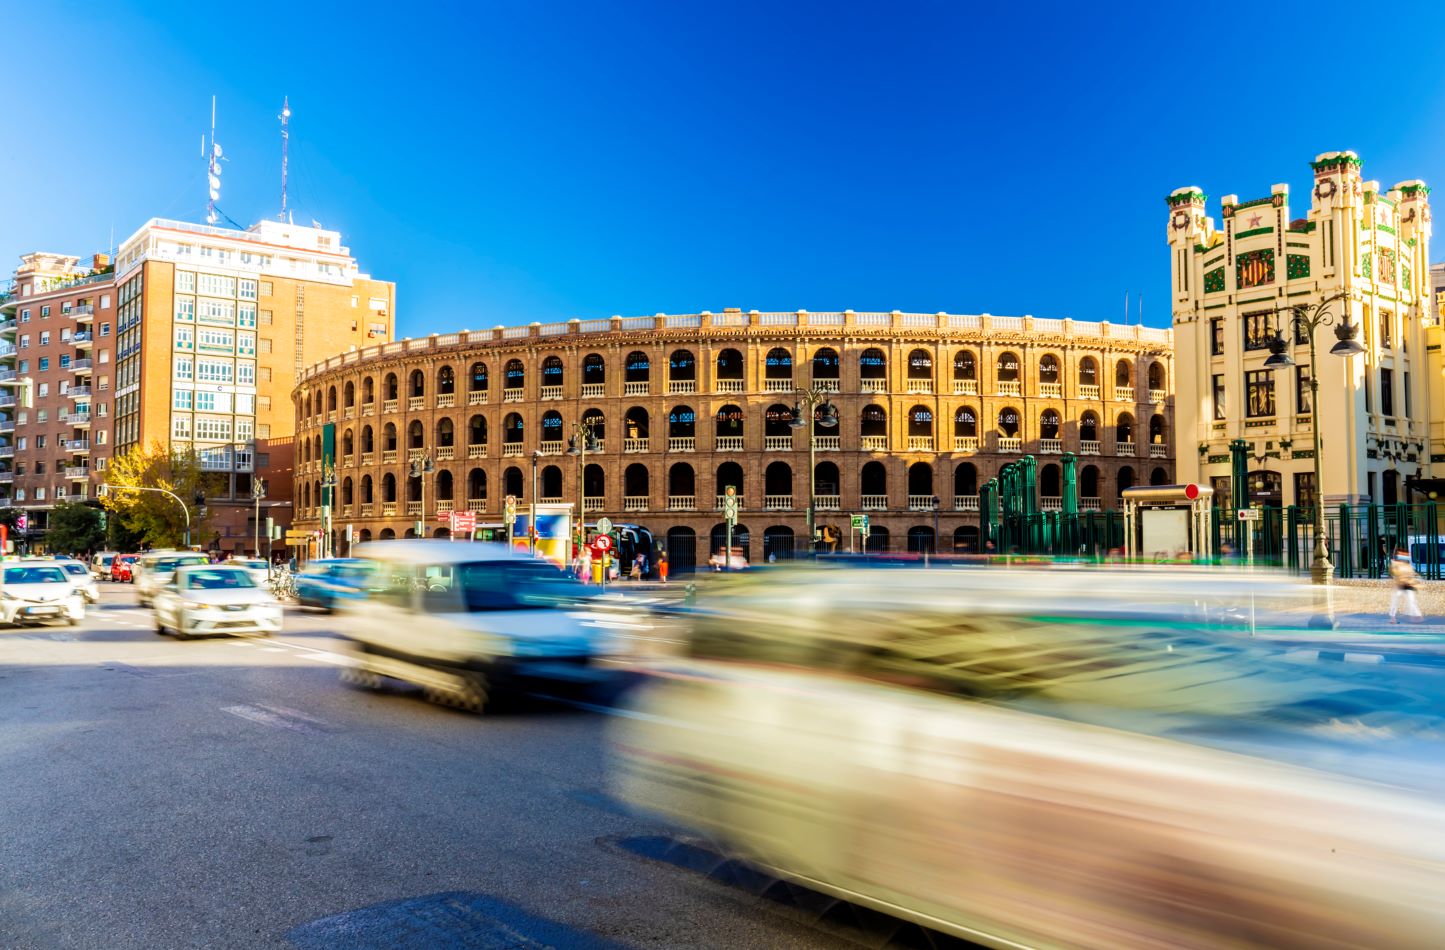 Car traffic passing by the bullring in Calle de Xàtiva, Valencia